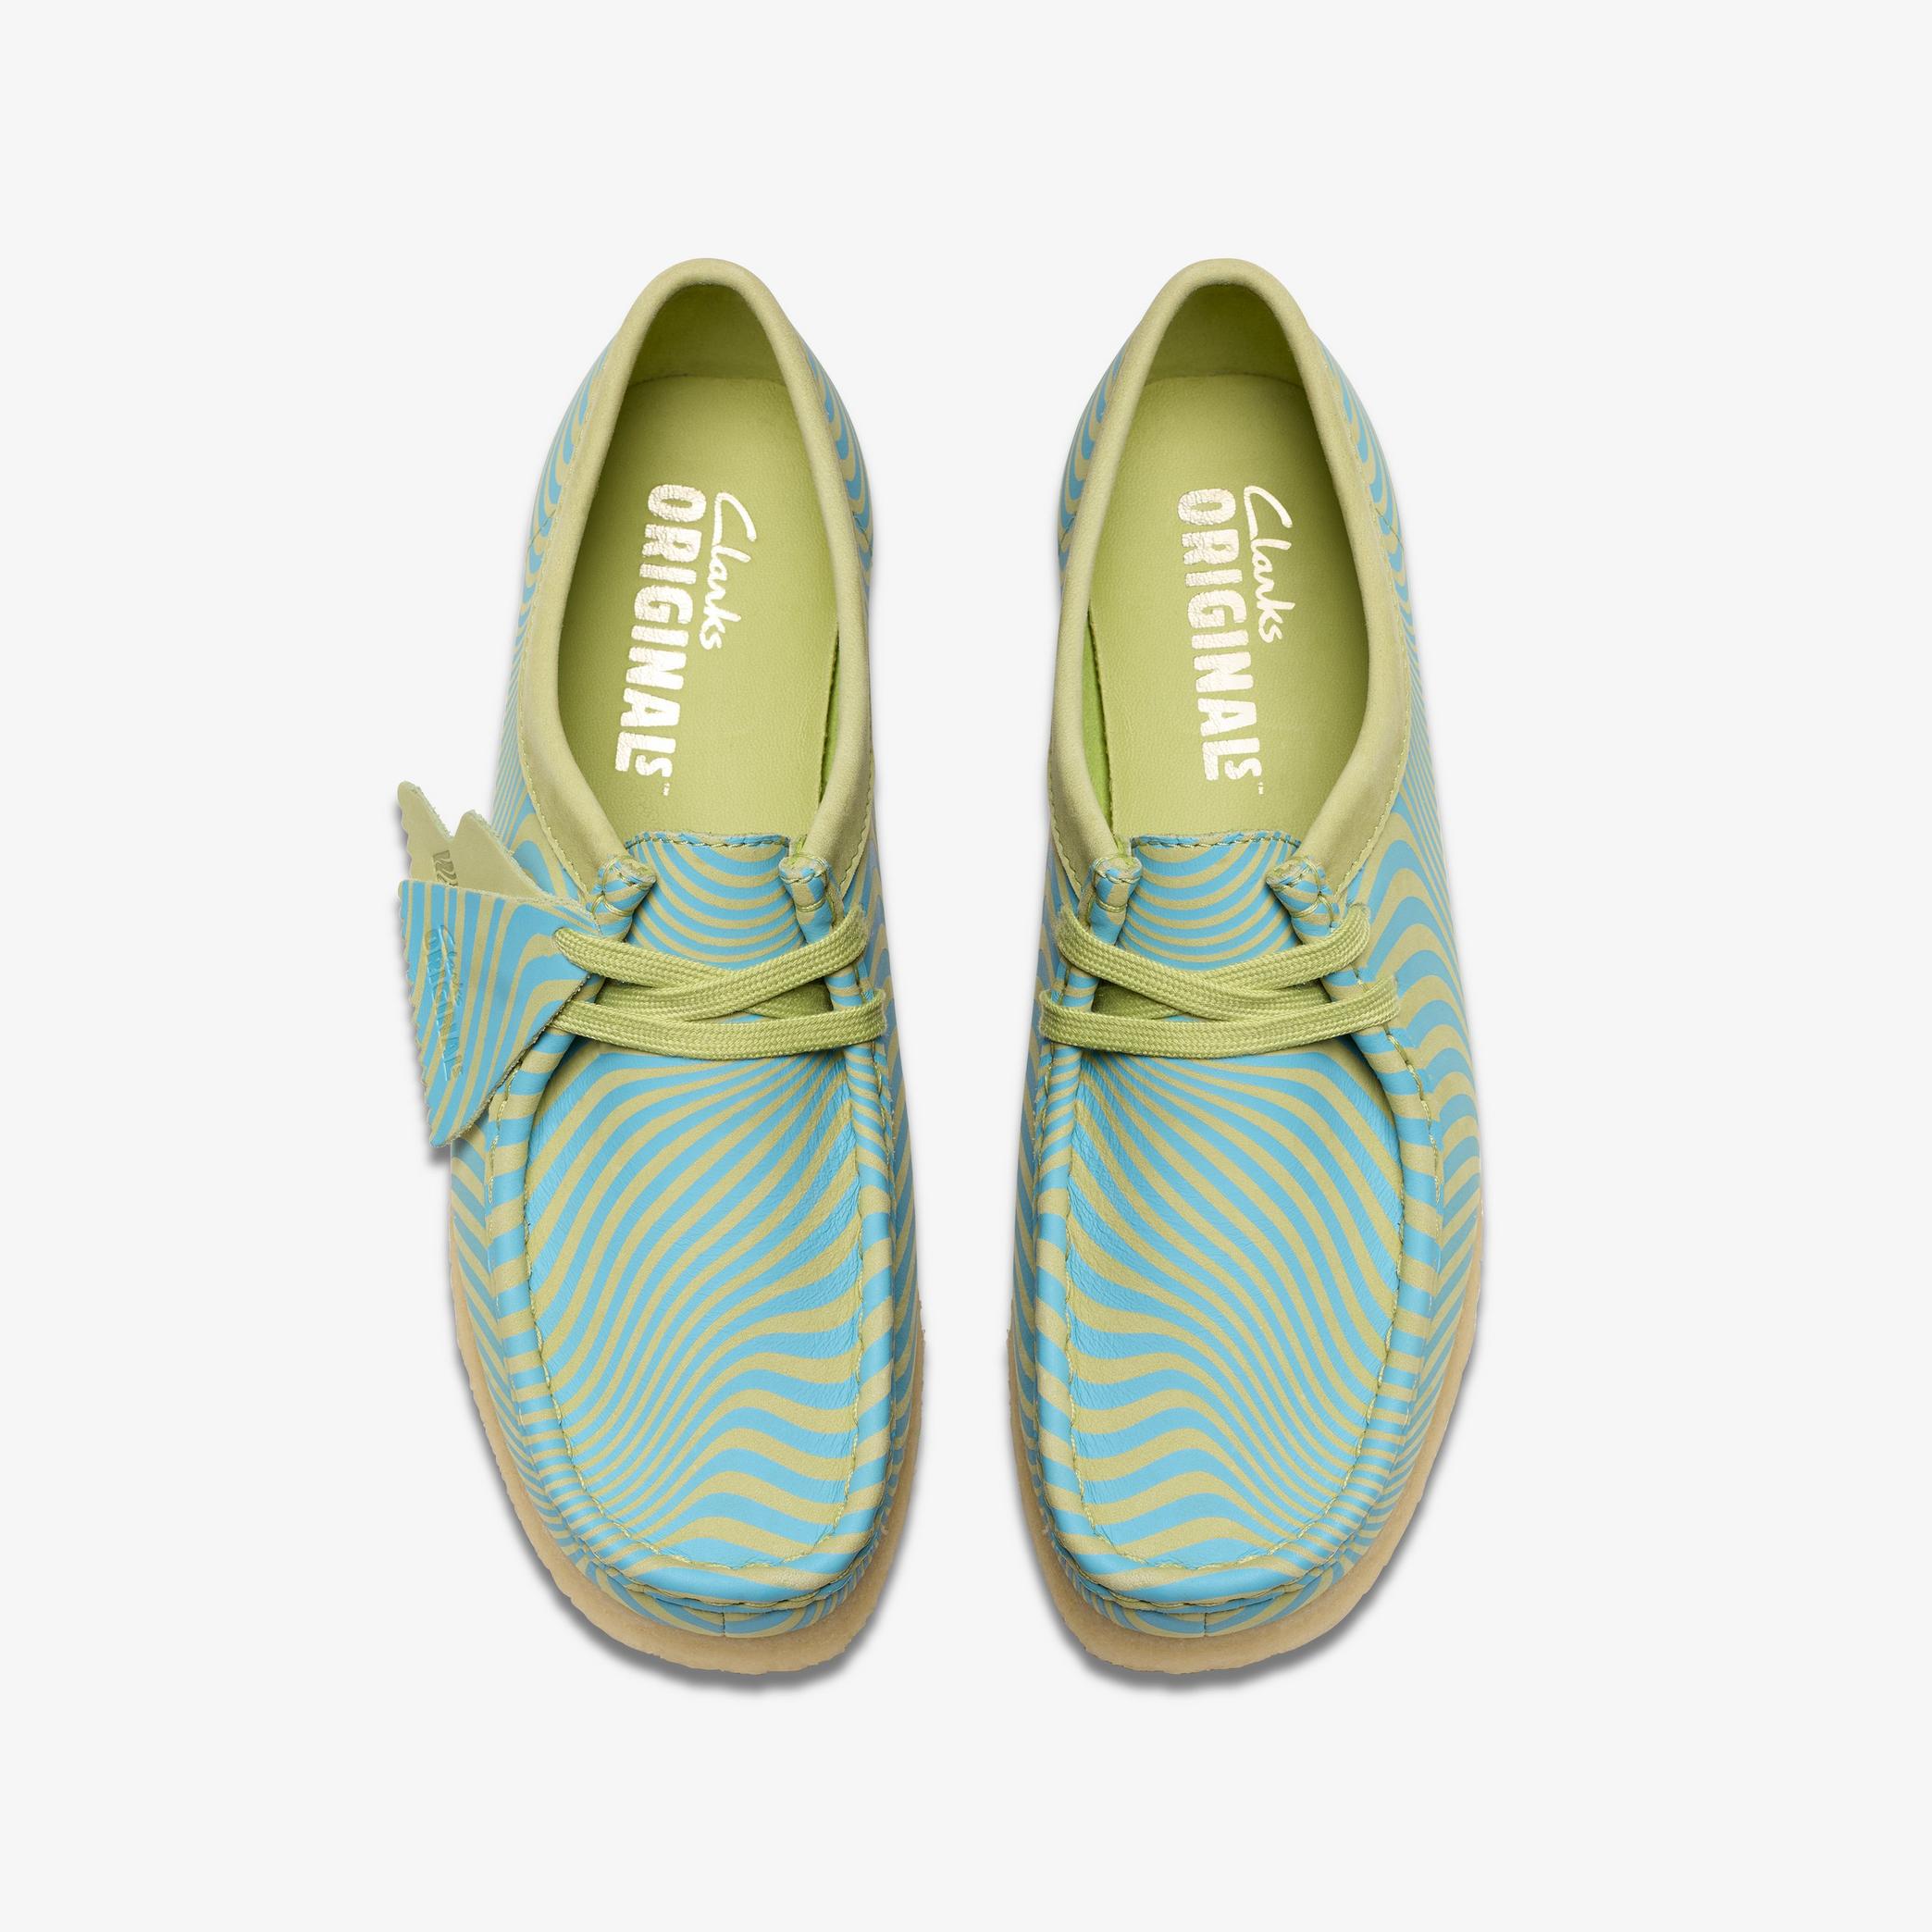 Wallabee Blue/Lime Print Wallabee, view 6 of 7